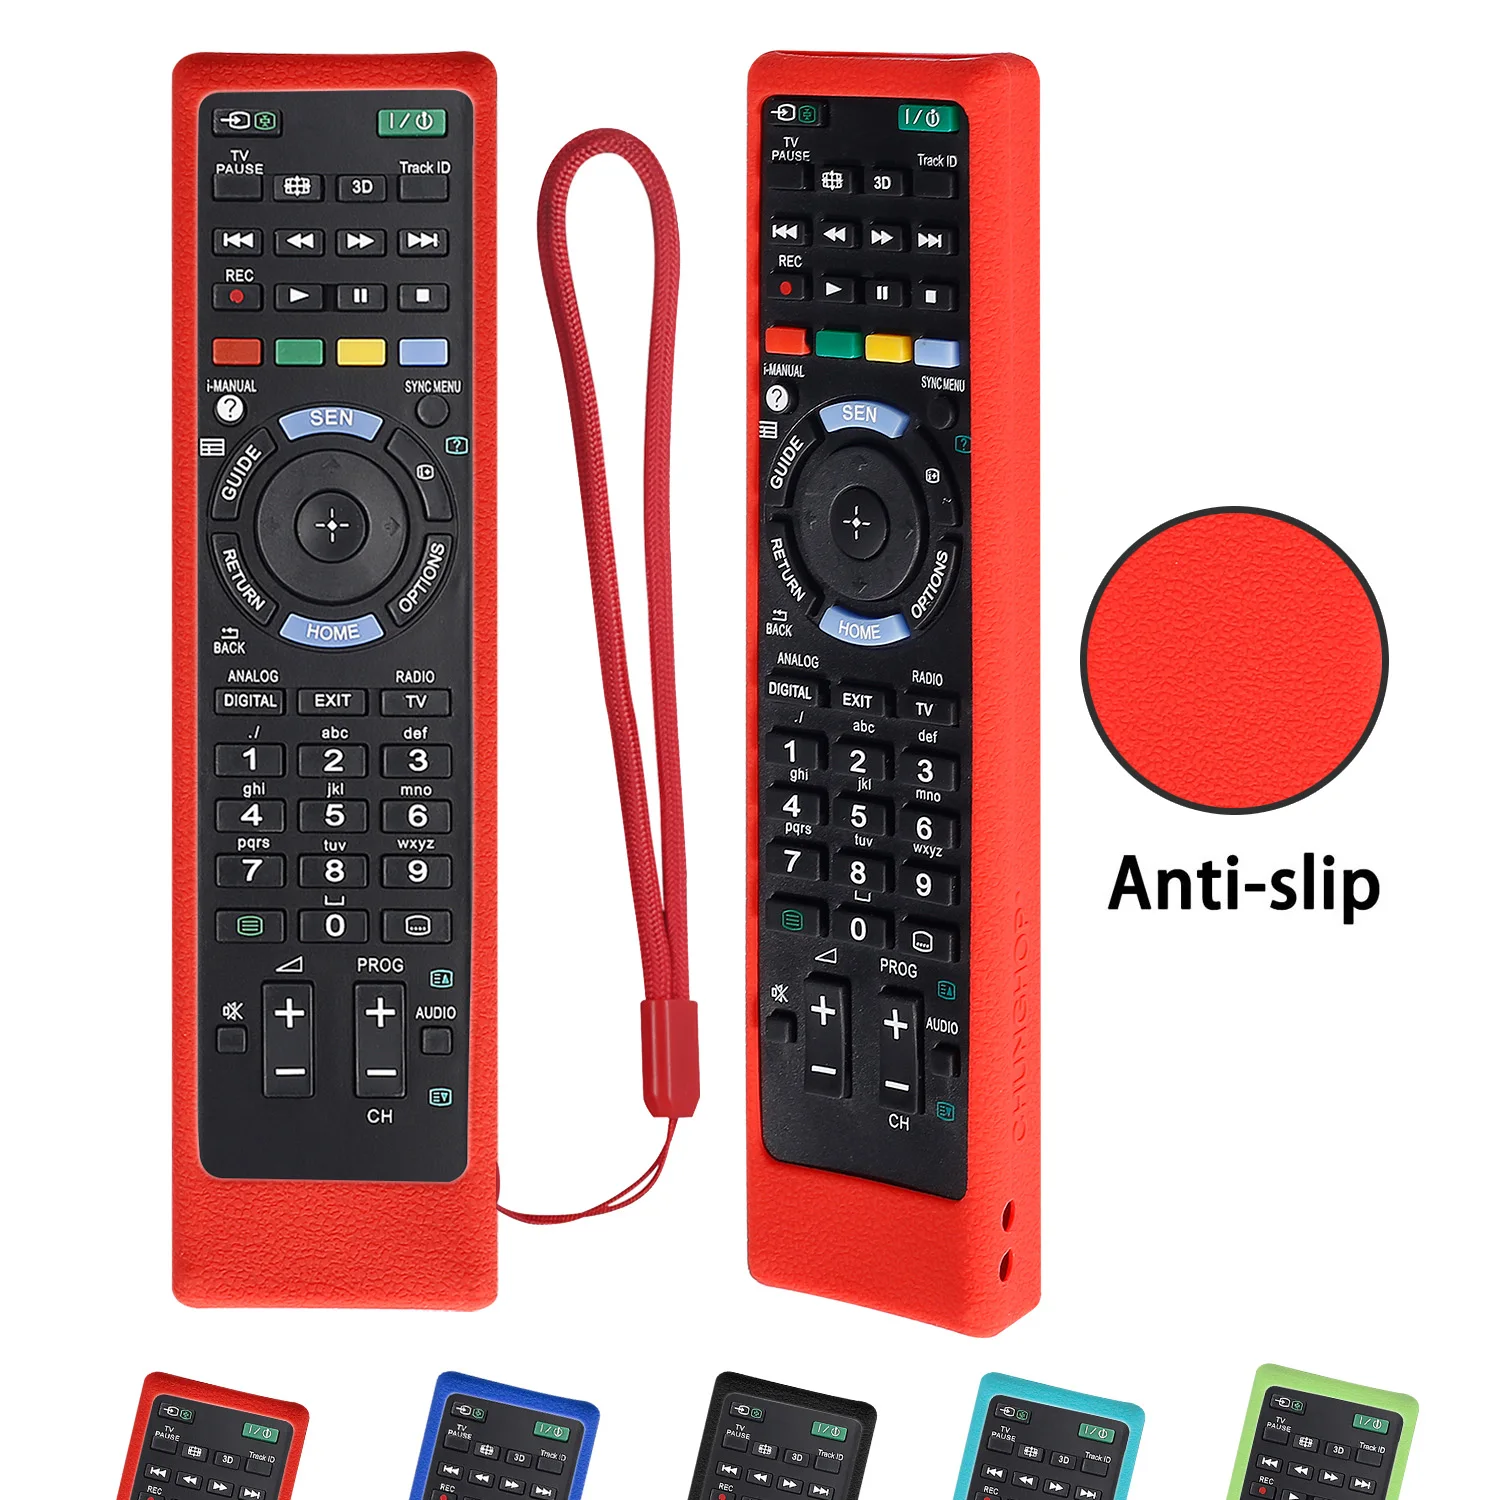 TV Remote Control Covers for Sony RMT-TX200C RMT-TX100D RM-ED053 RM-ED060 RMF-TX300C RM-ED052 RM-ED050 Shockproof Silicone Case